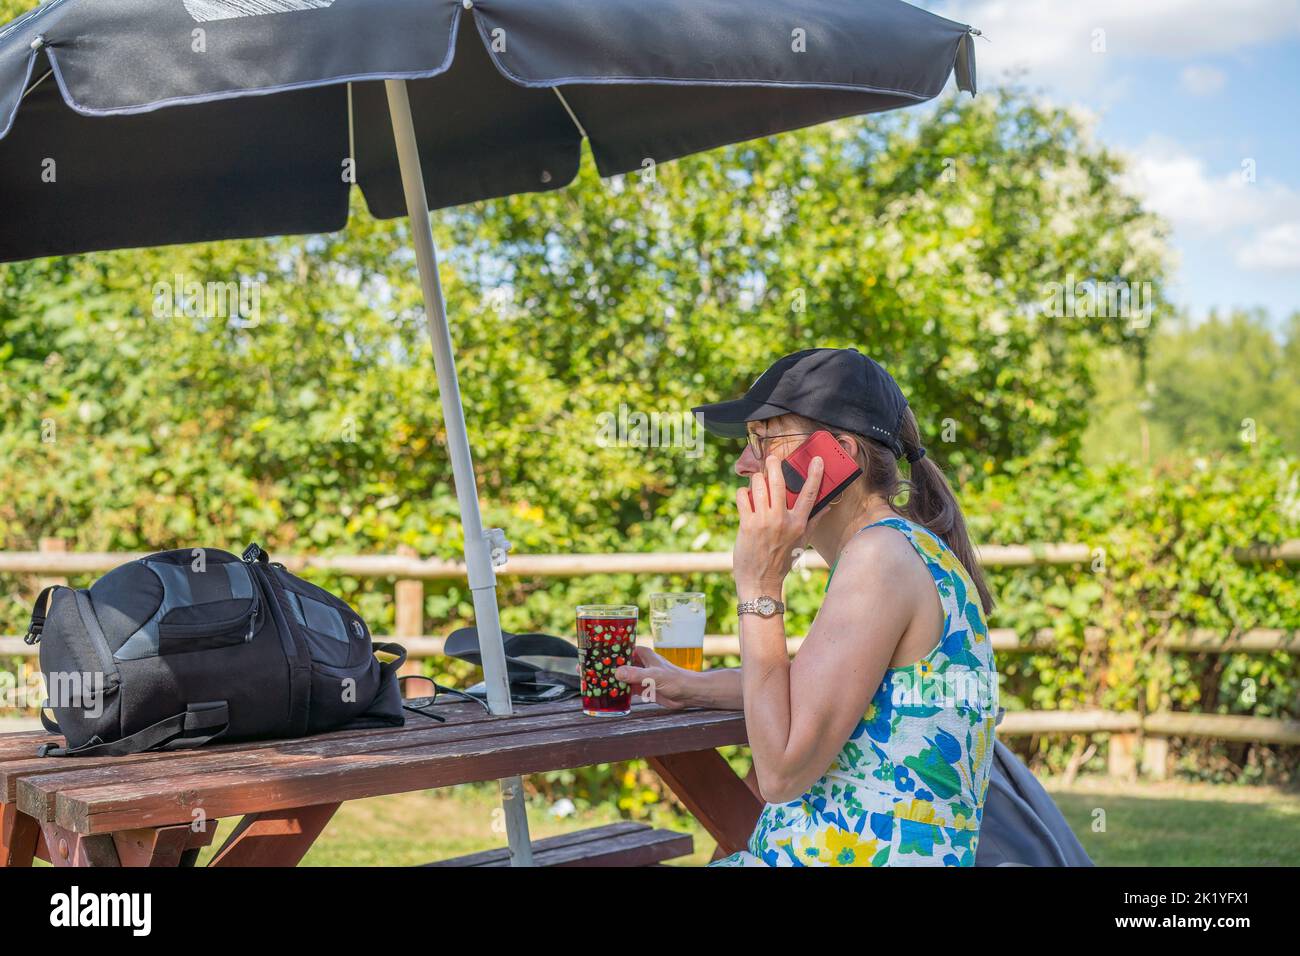 Side view of woman sat drinking in a pub garden on a sunny day talking on her mobile phone, sheltering under a garden brolly for sun protection. Stock Photo